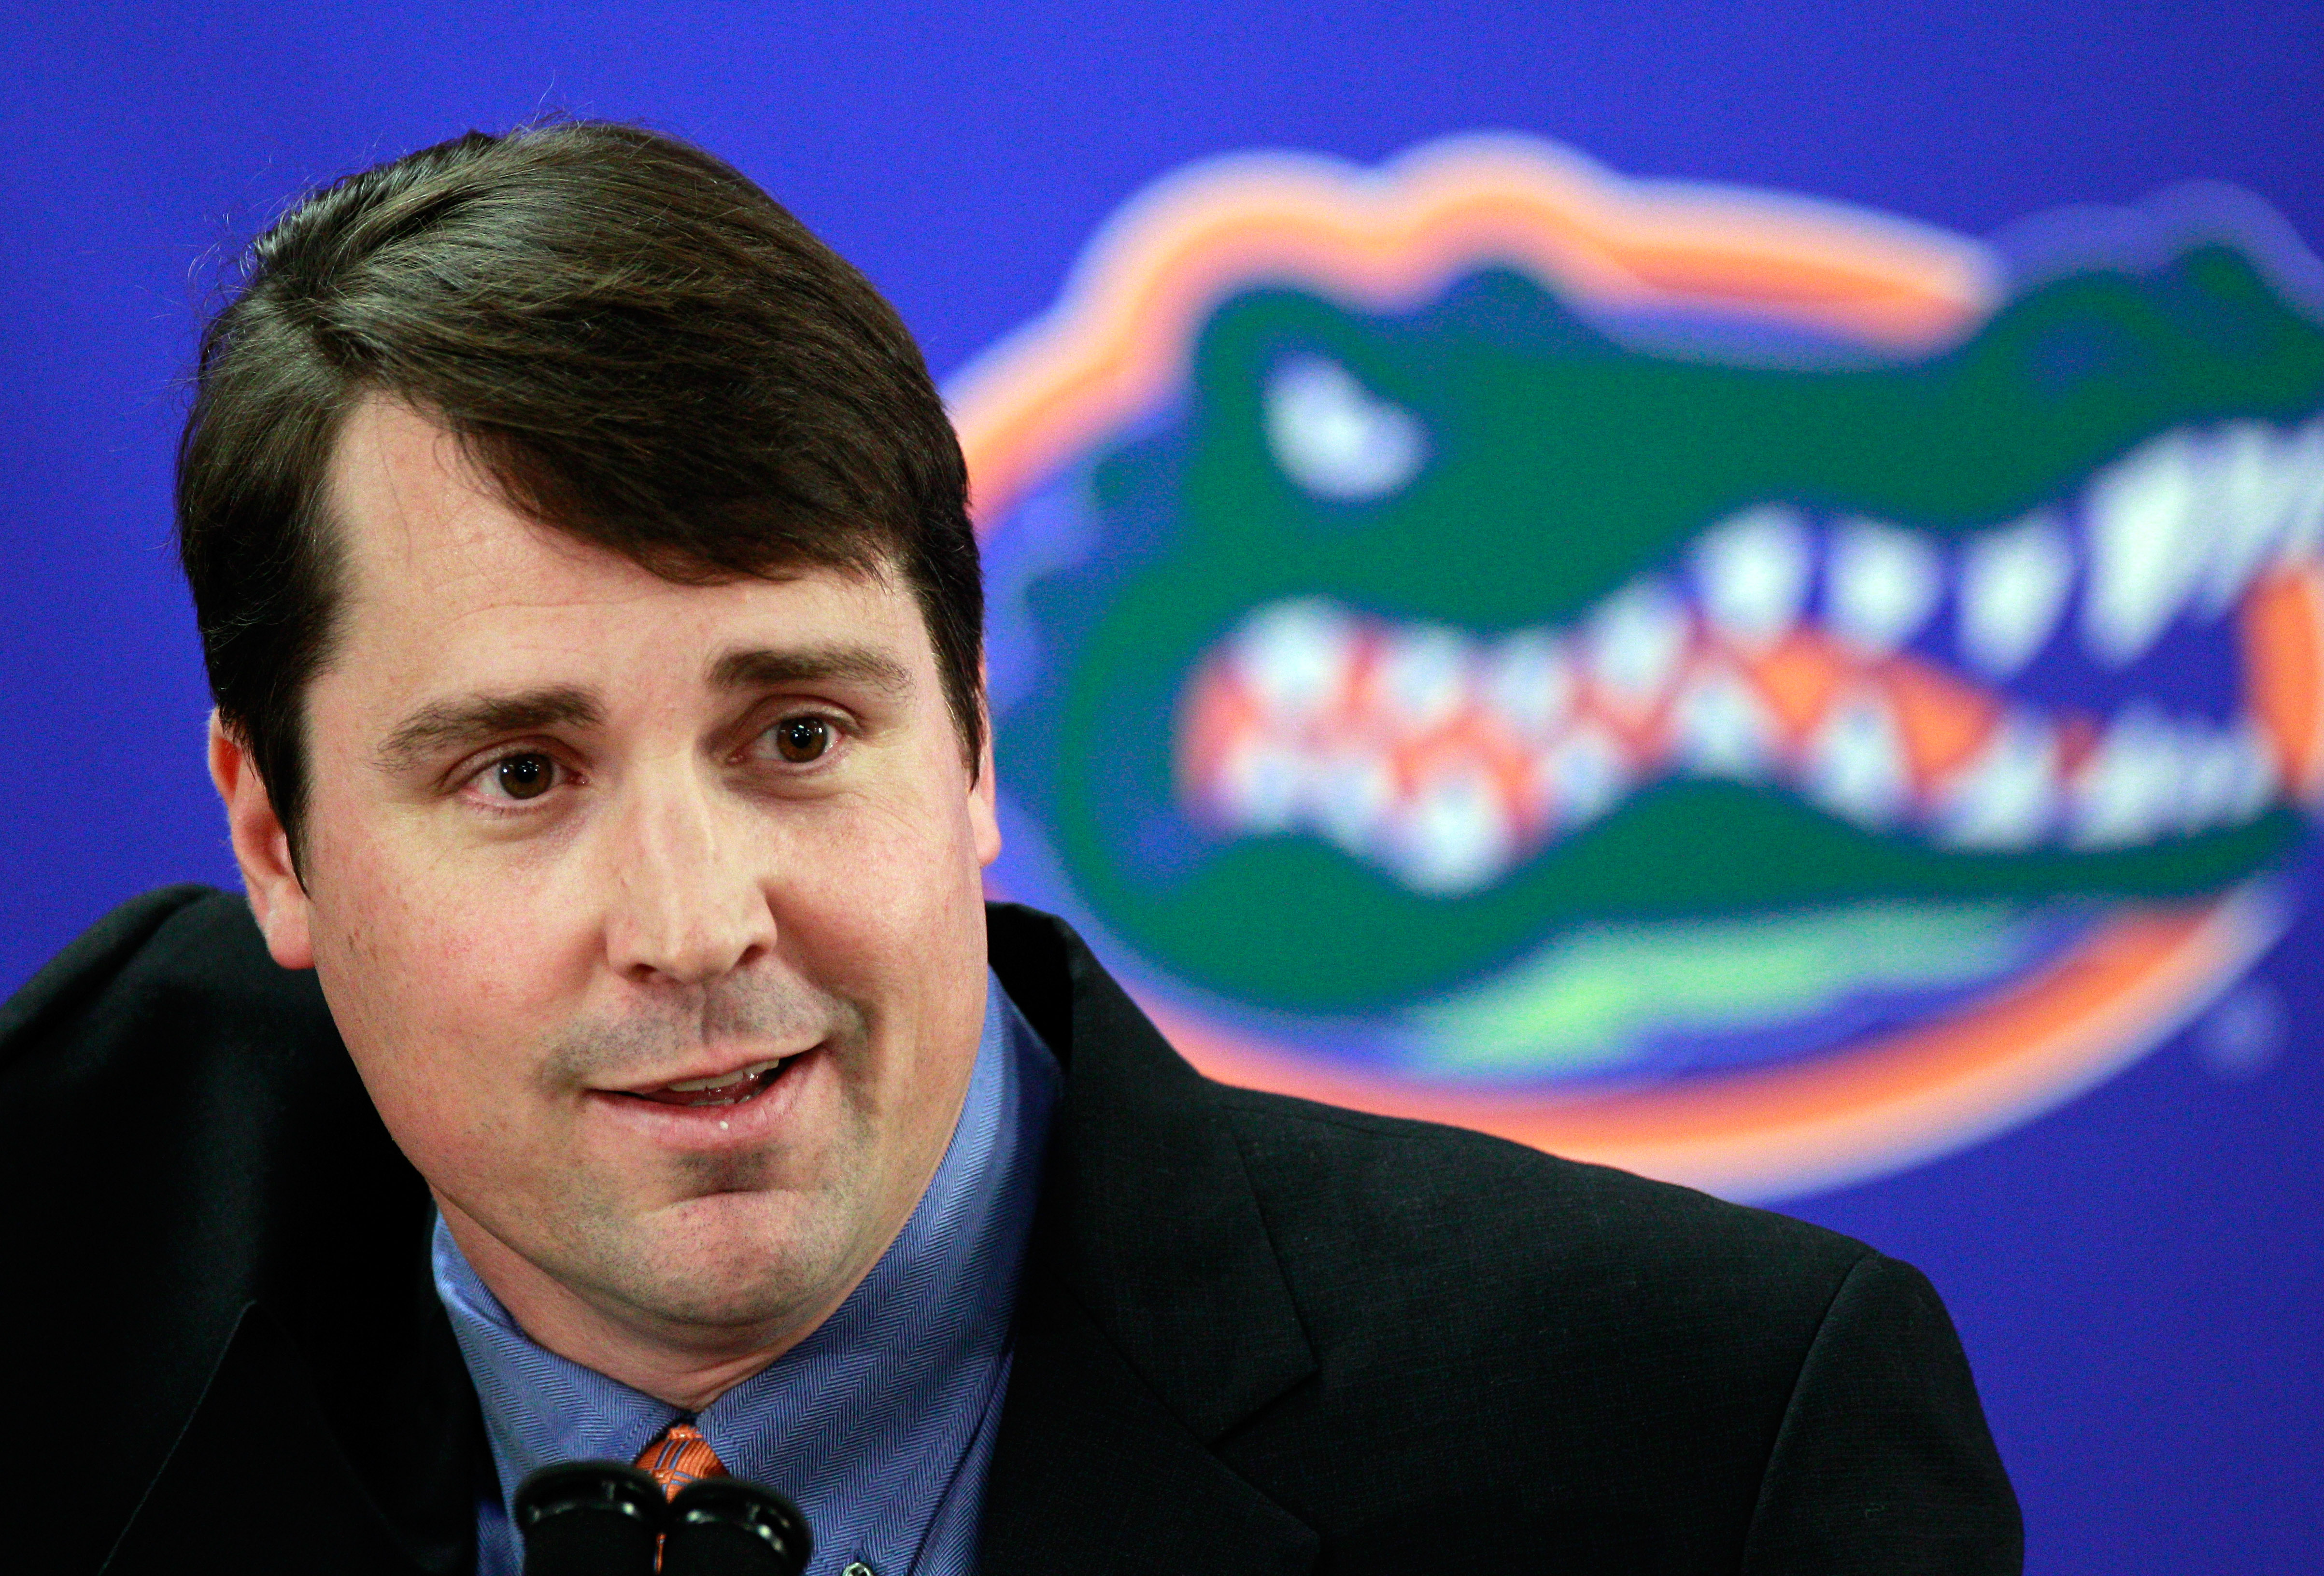 GAINESVILLE, FL - DECEMBER 14:  Former defensive coordinator for the University of Texas, Will Muschamp speaks to the media after being introduced as the head coach of the University of Florida on December 14, 2010 in Gainesville, Florida.  Muschamp is re